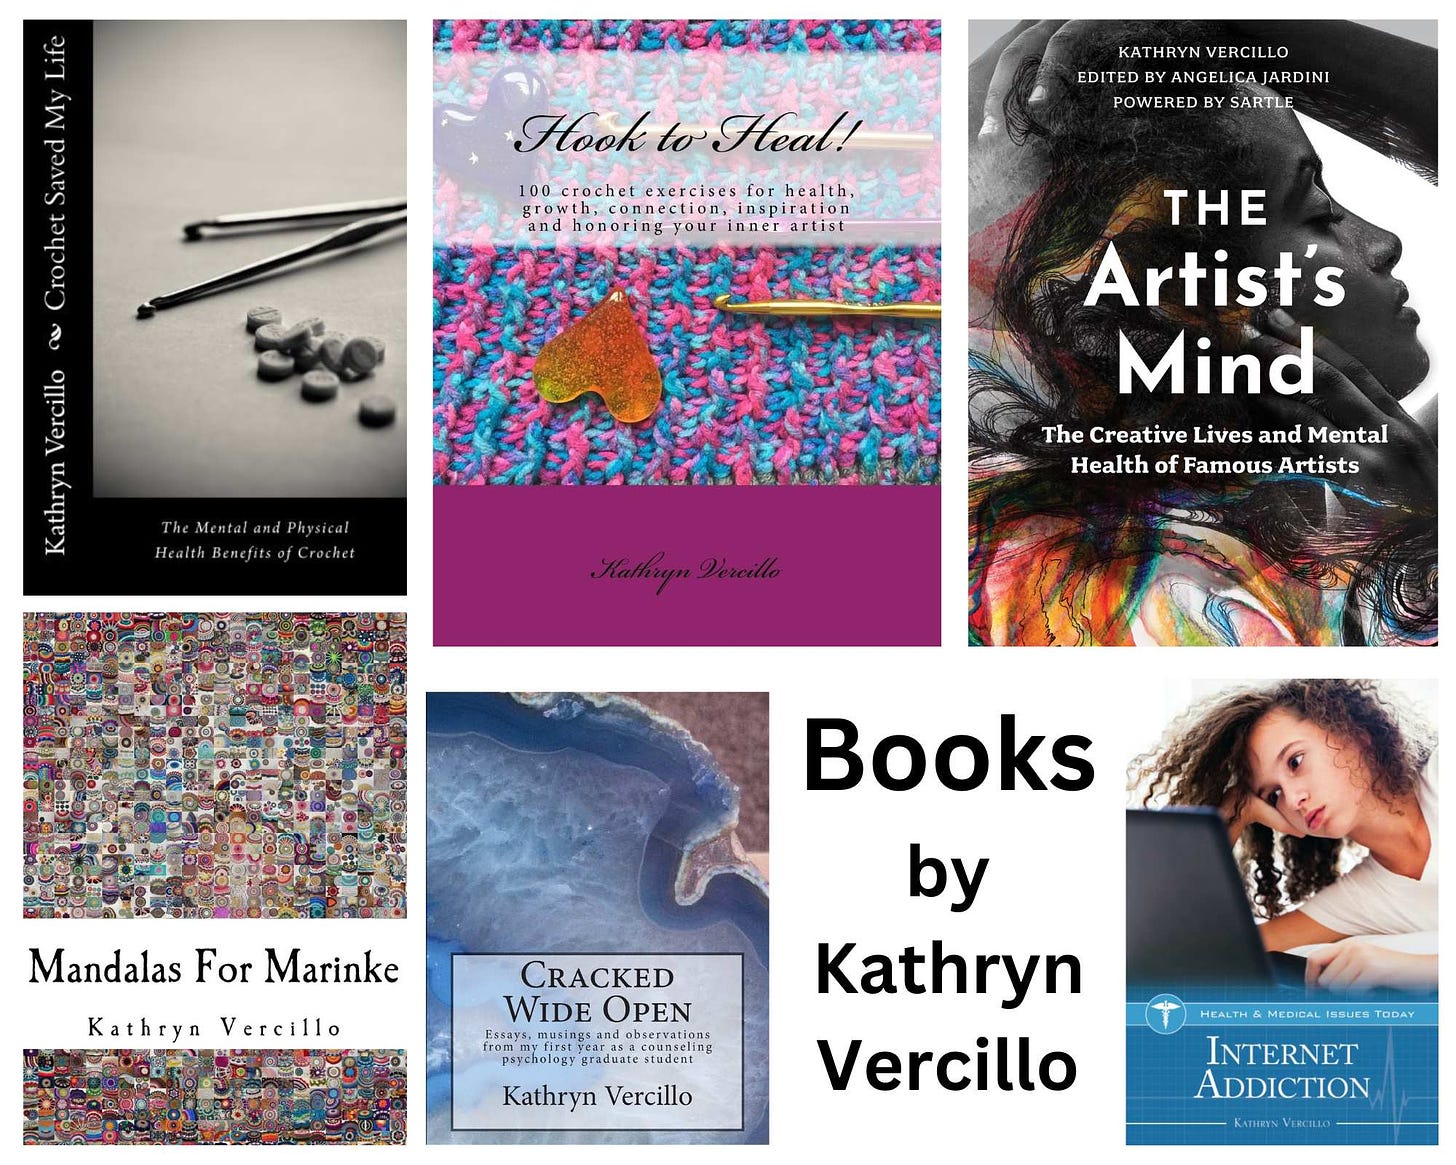 Collage of photos of front covers of books written by Kathryn Vercillo